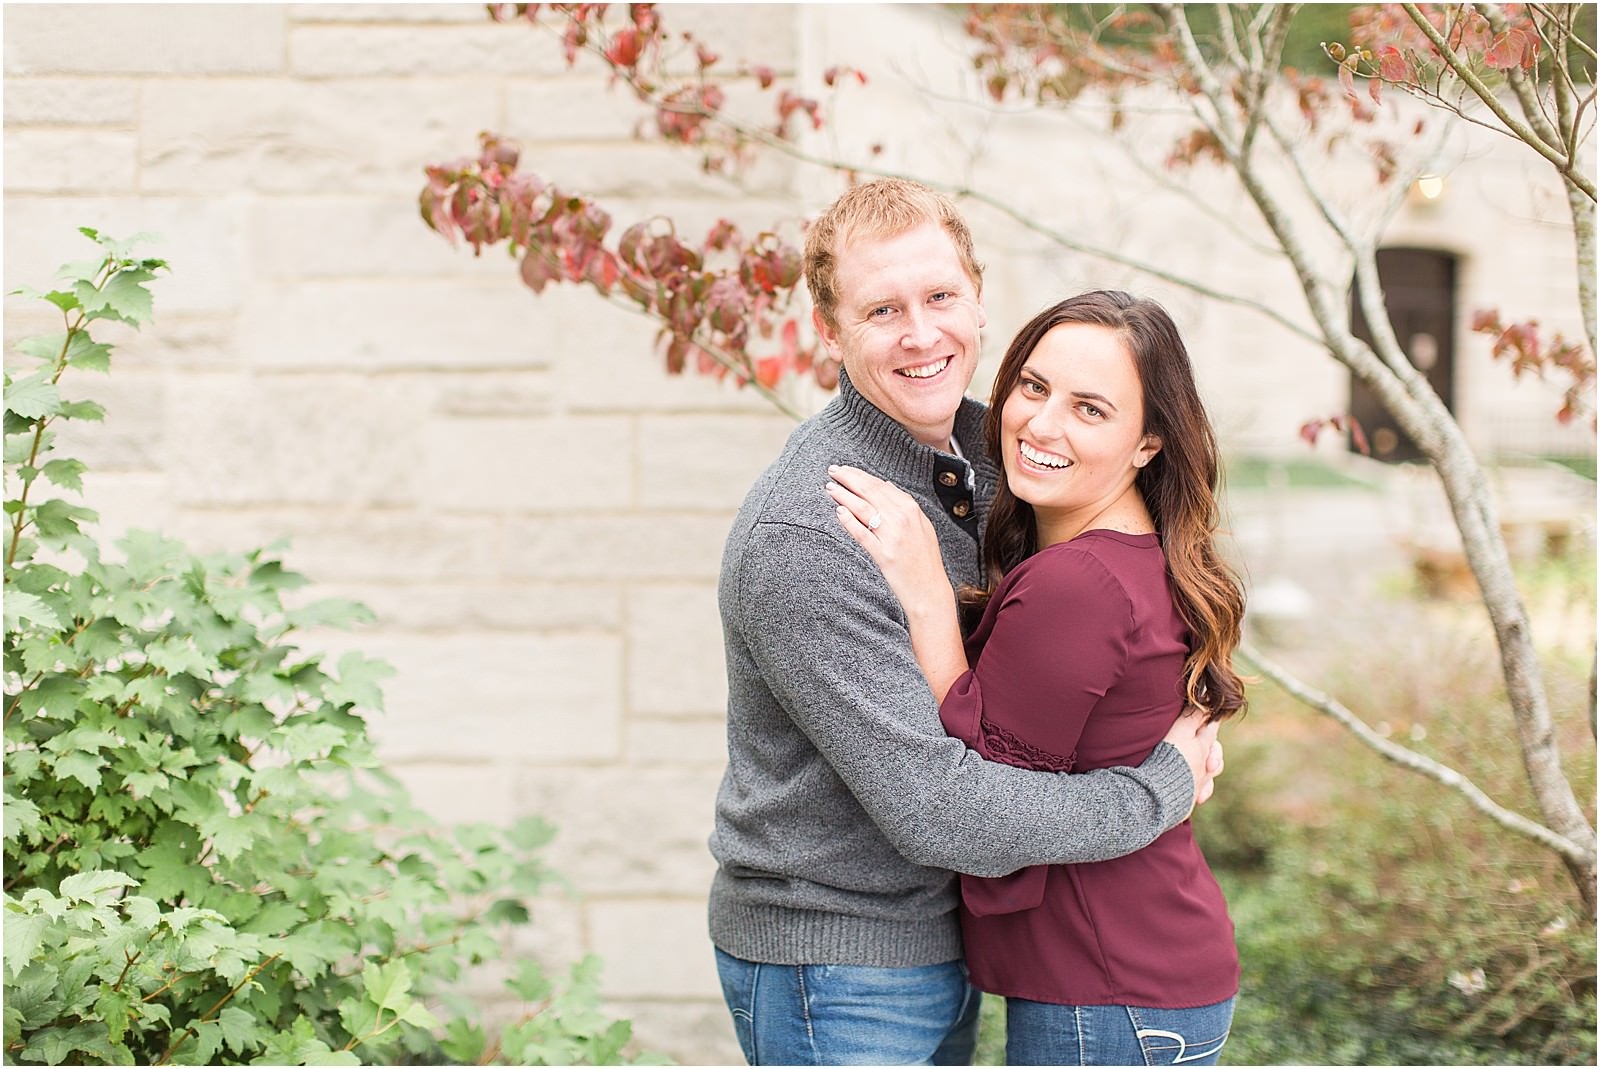 A Lincoln State Park Engagemtent Session | Deidra and Andrew | Bret and Brandie Photography 0017.jpg